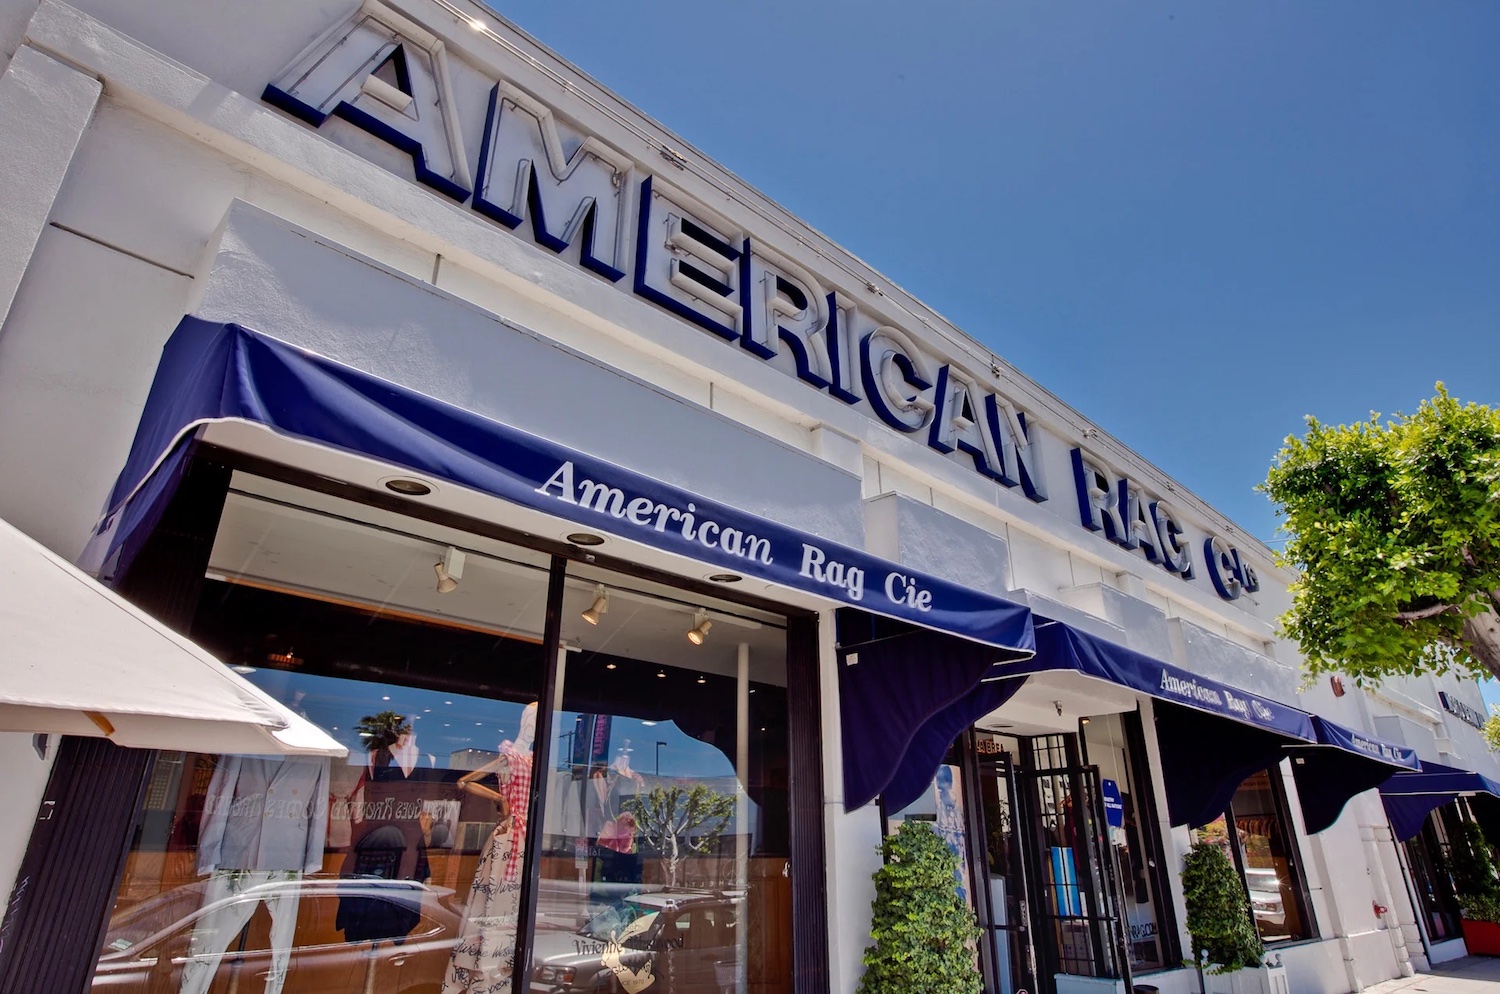 Exterior of American Rag with a large sign that says "AMERICAN RAG"